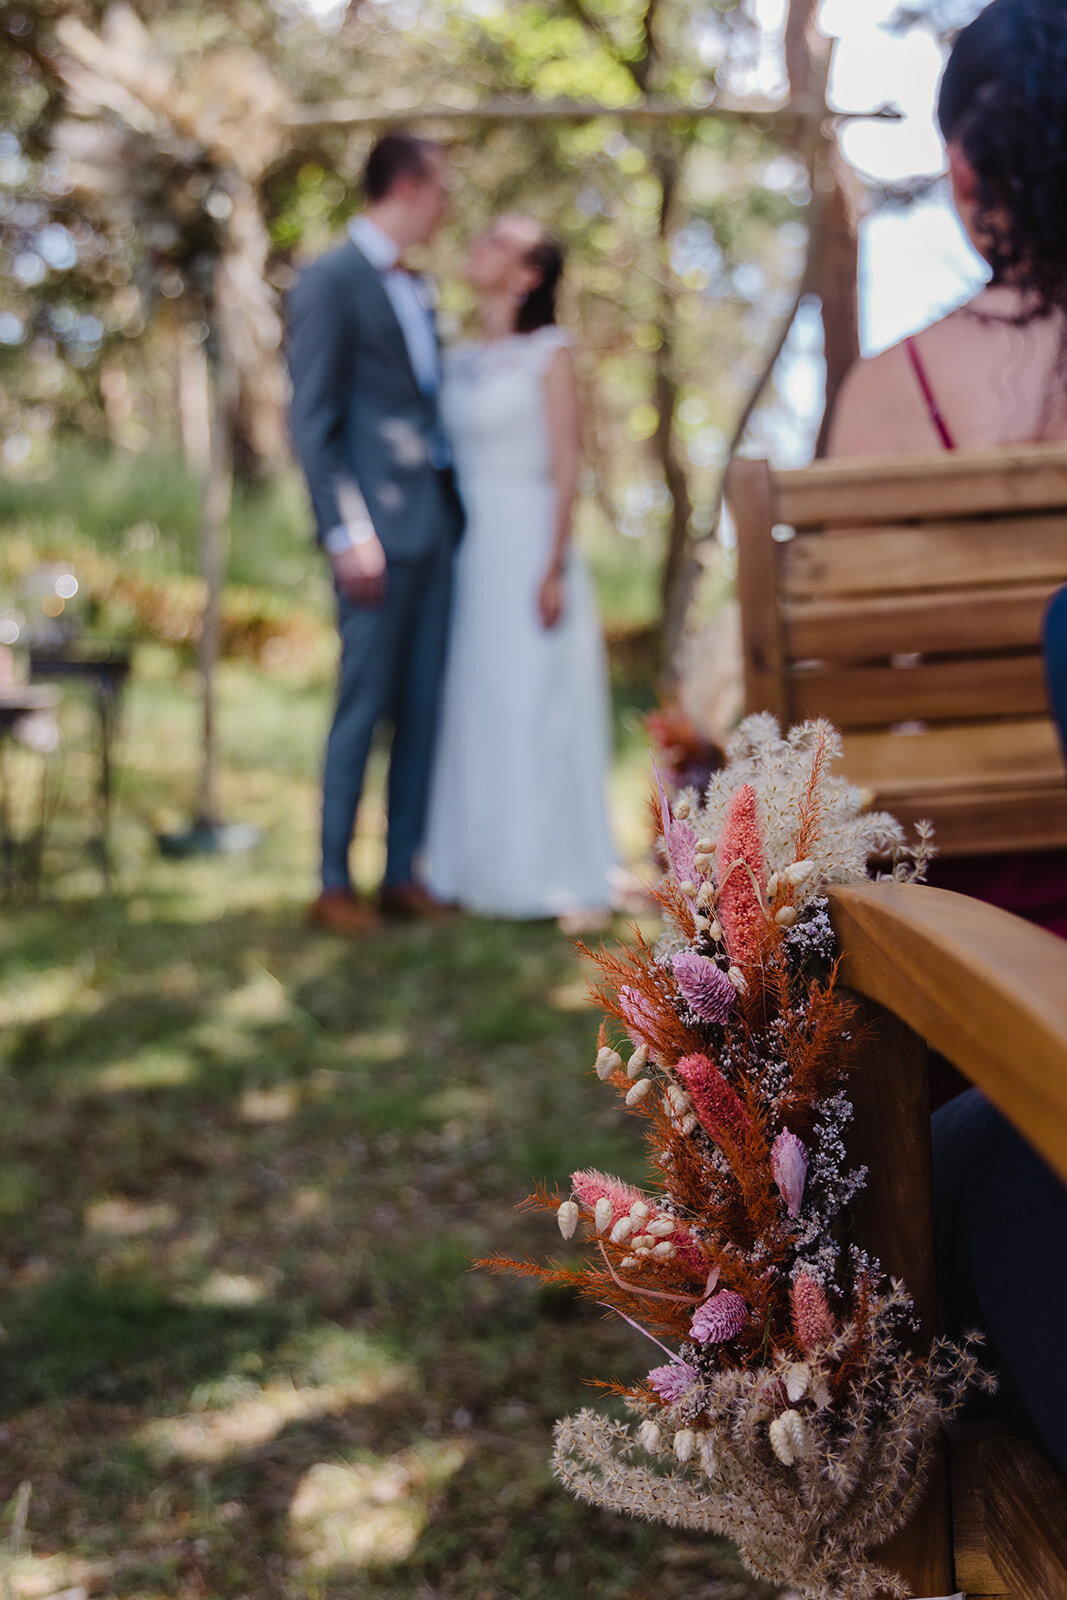 A touching flower detail at the seating arrangement during a forest wedding ceremony, an option in our microwedding package abroad.